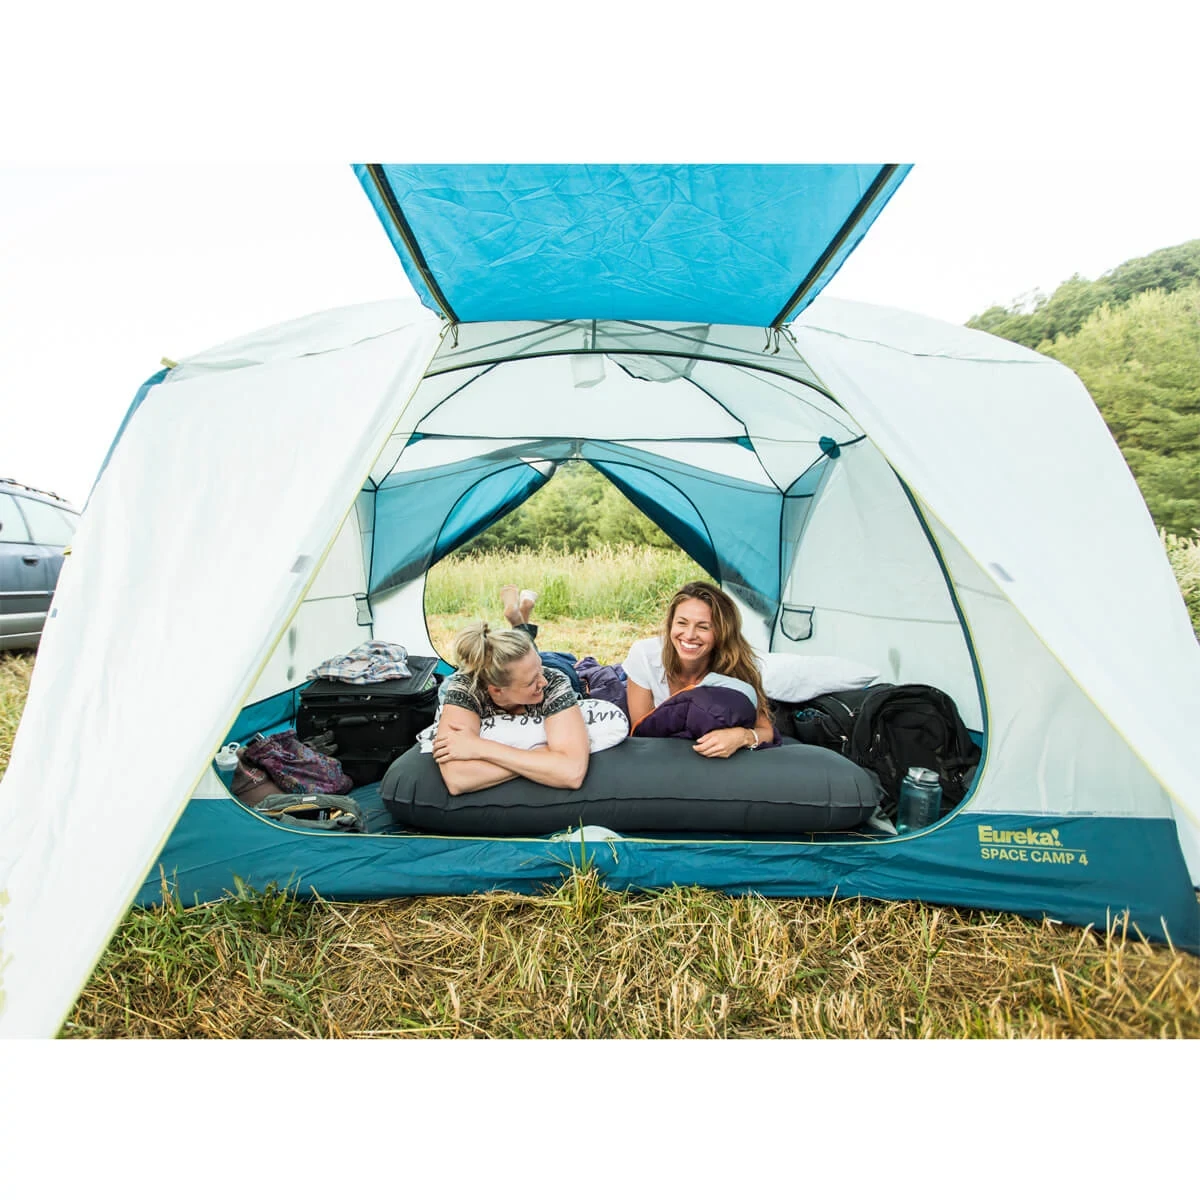 Women in a Space Camp 4 Person Tent